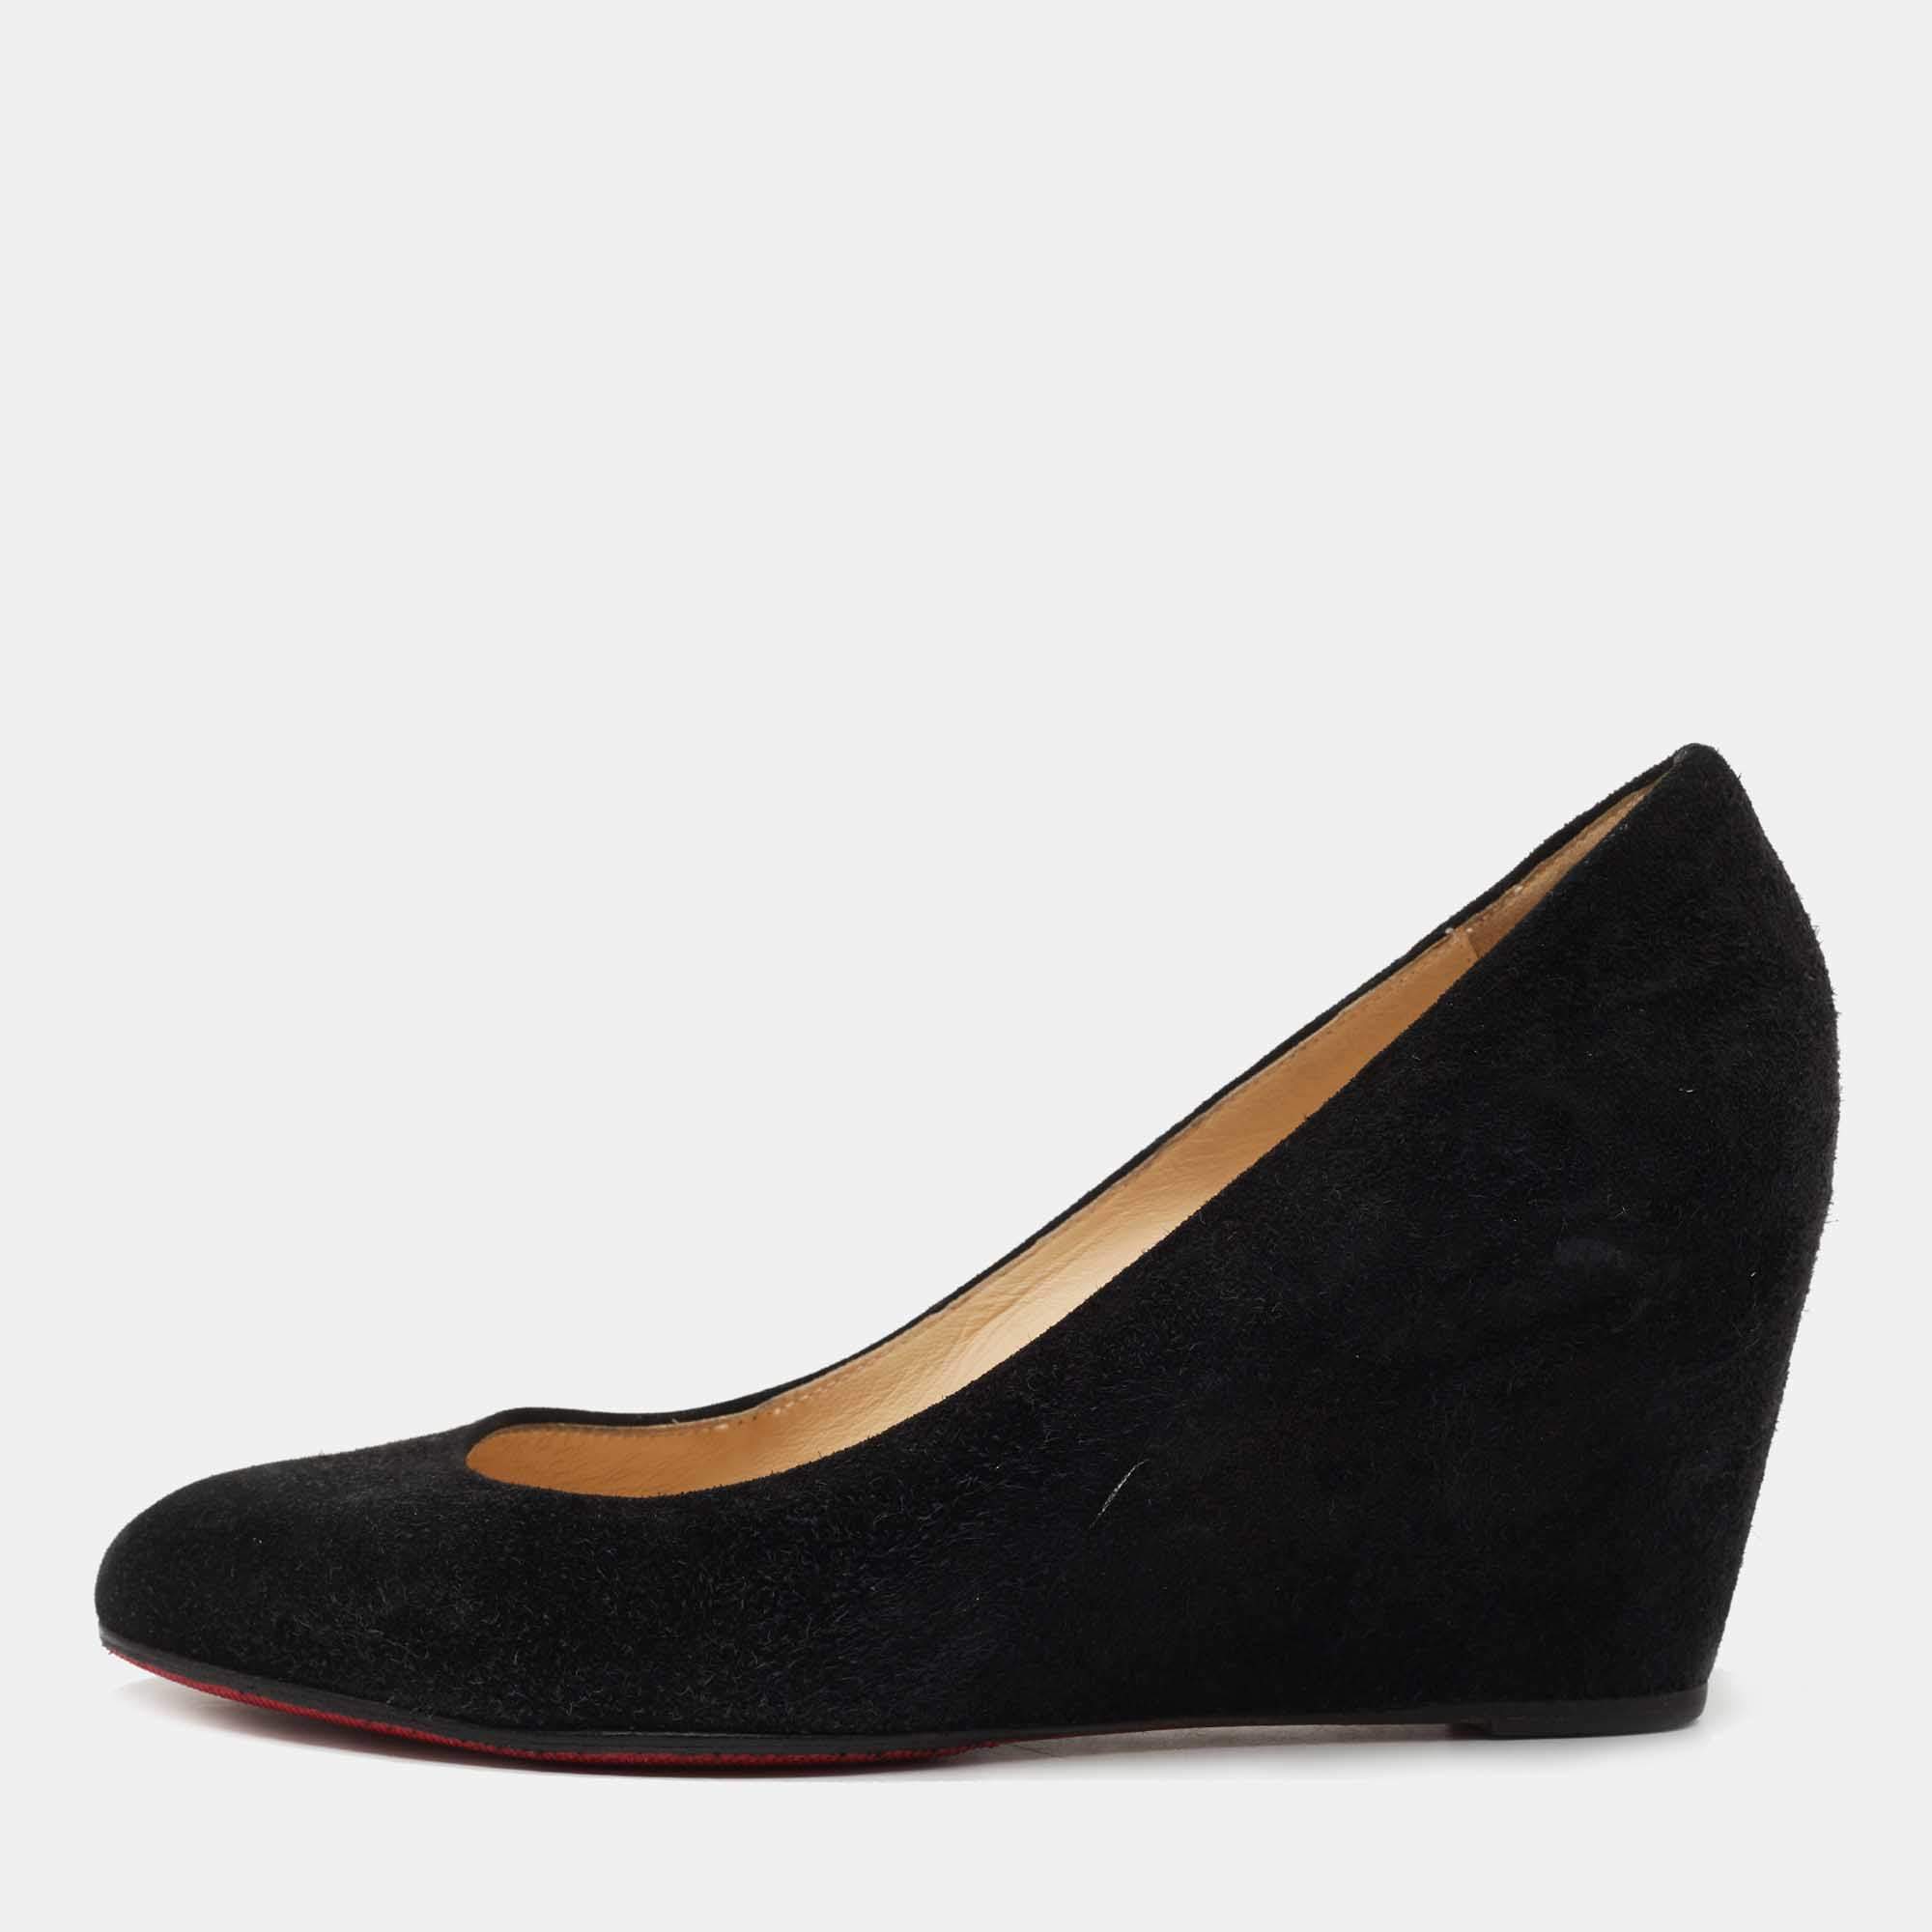 Christian Louboutin Black Suede Ron Ron Wedge Pumps Size 40